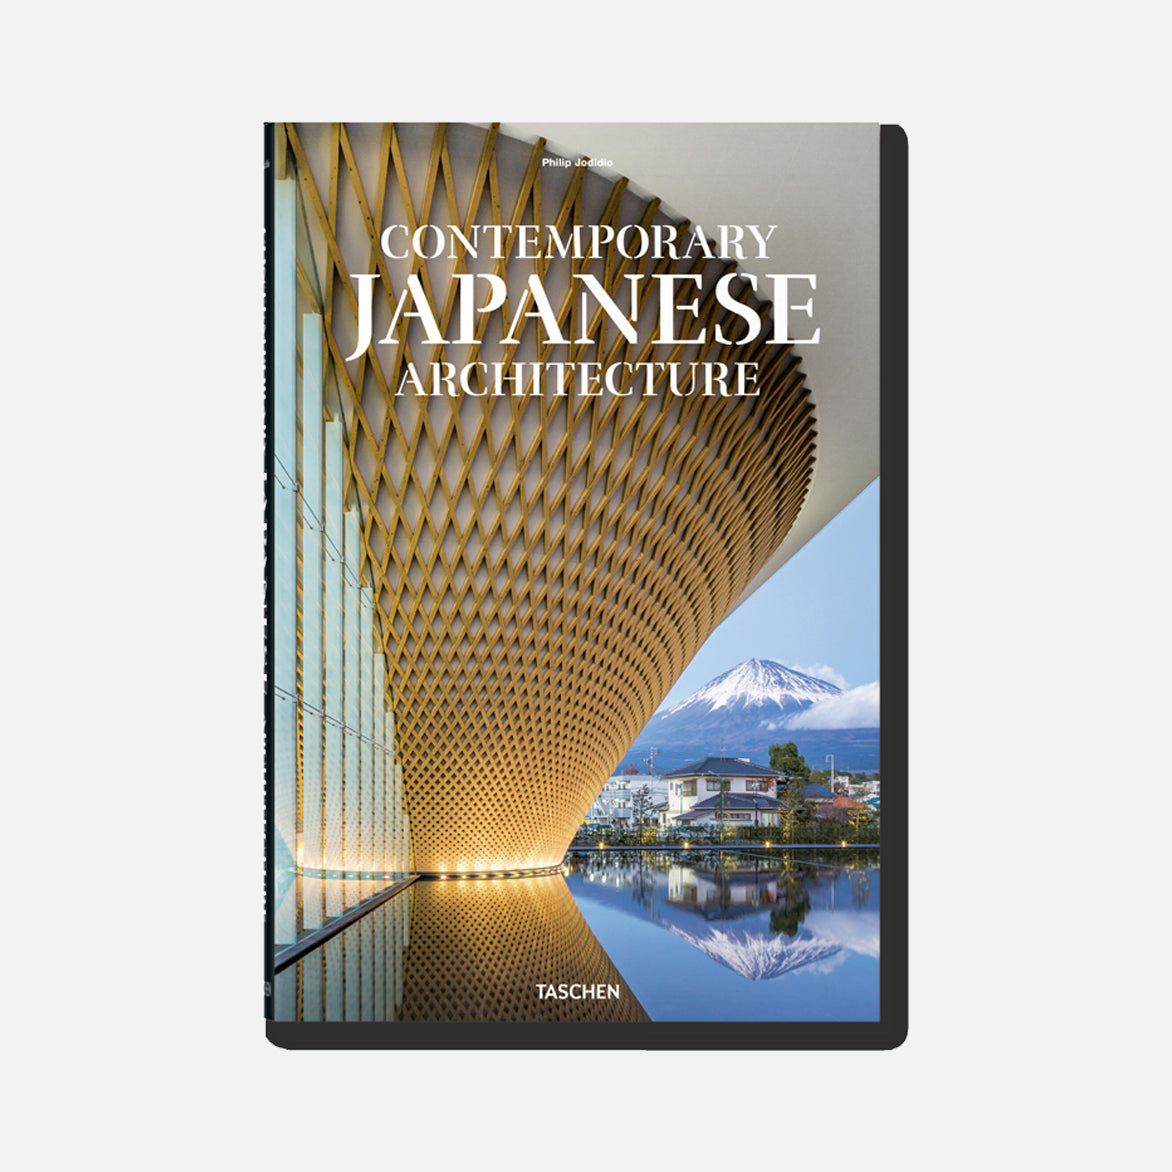 CONTEMPORARY JAPANISE ARCHITECTURE